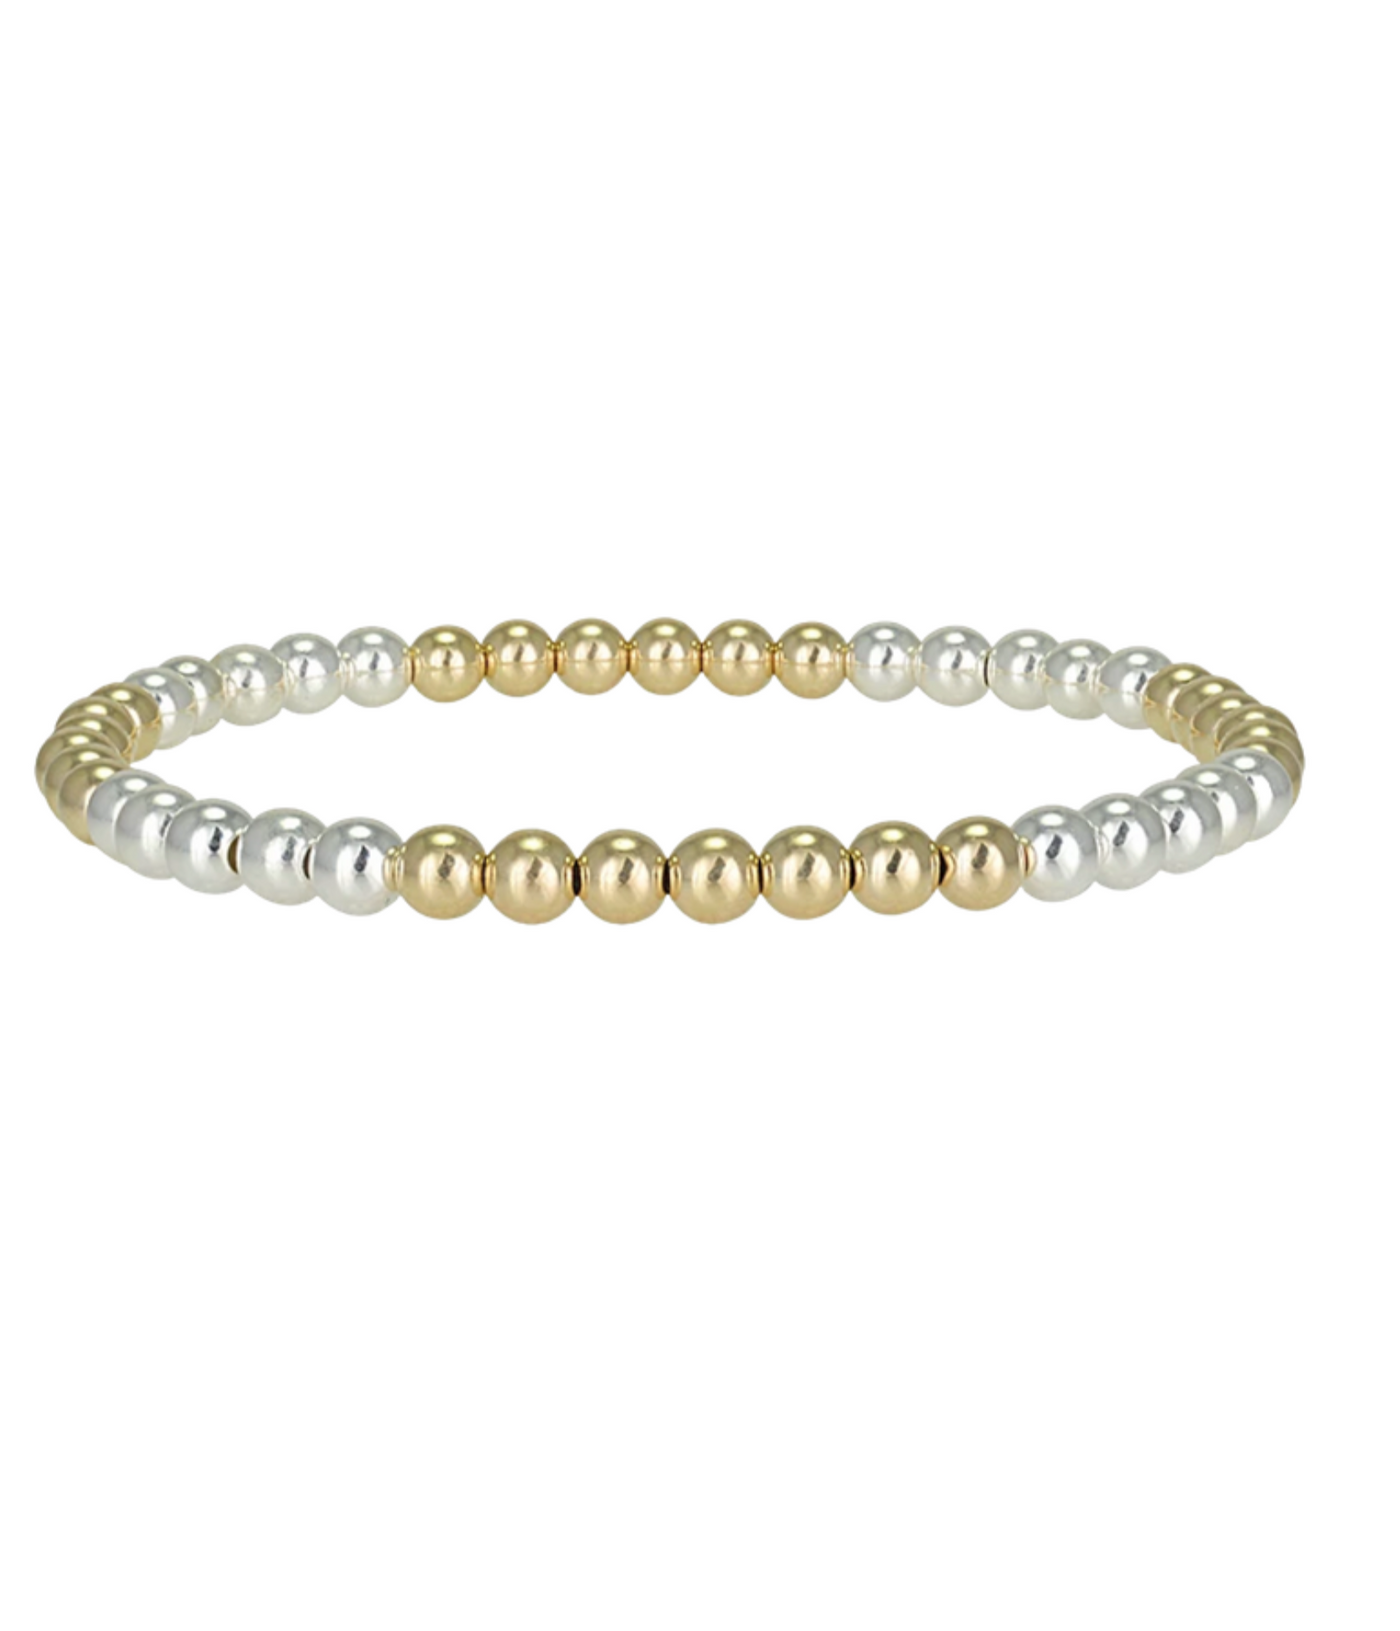 Silver + Gold Sections Bracelet - 4mm